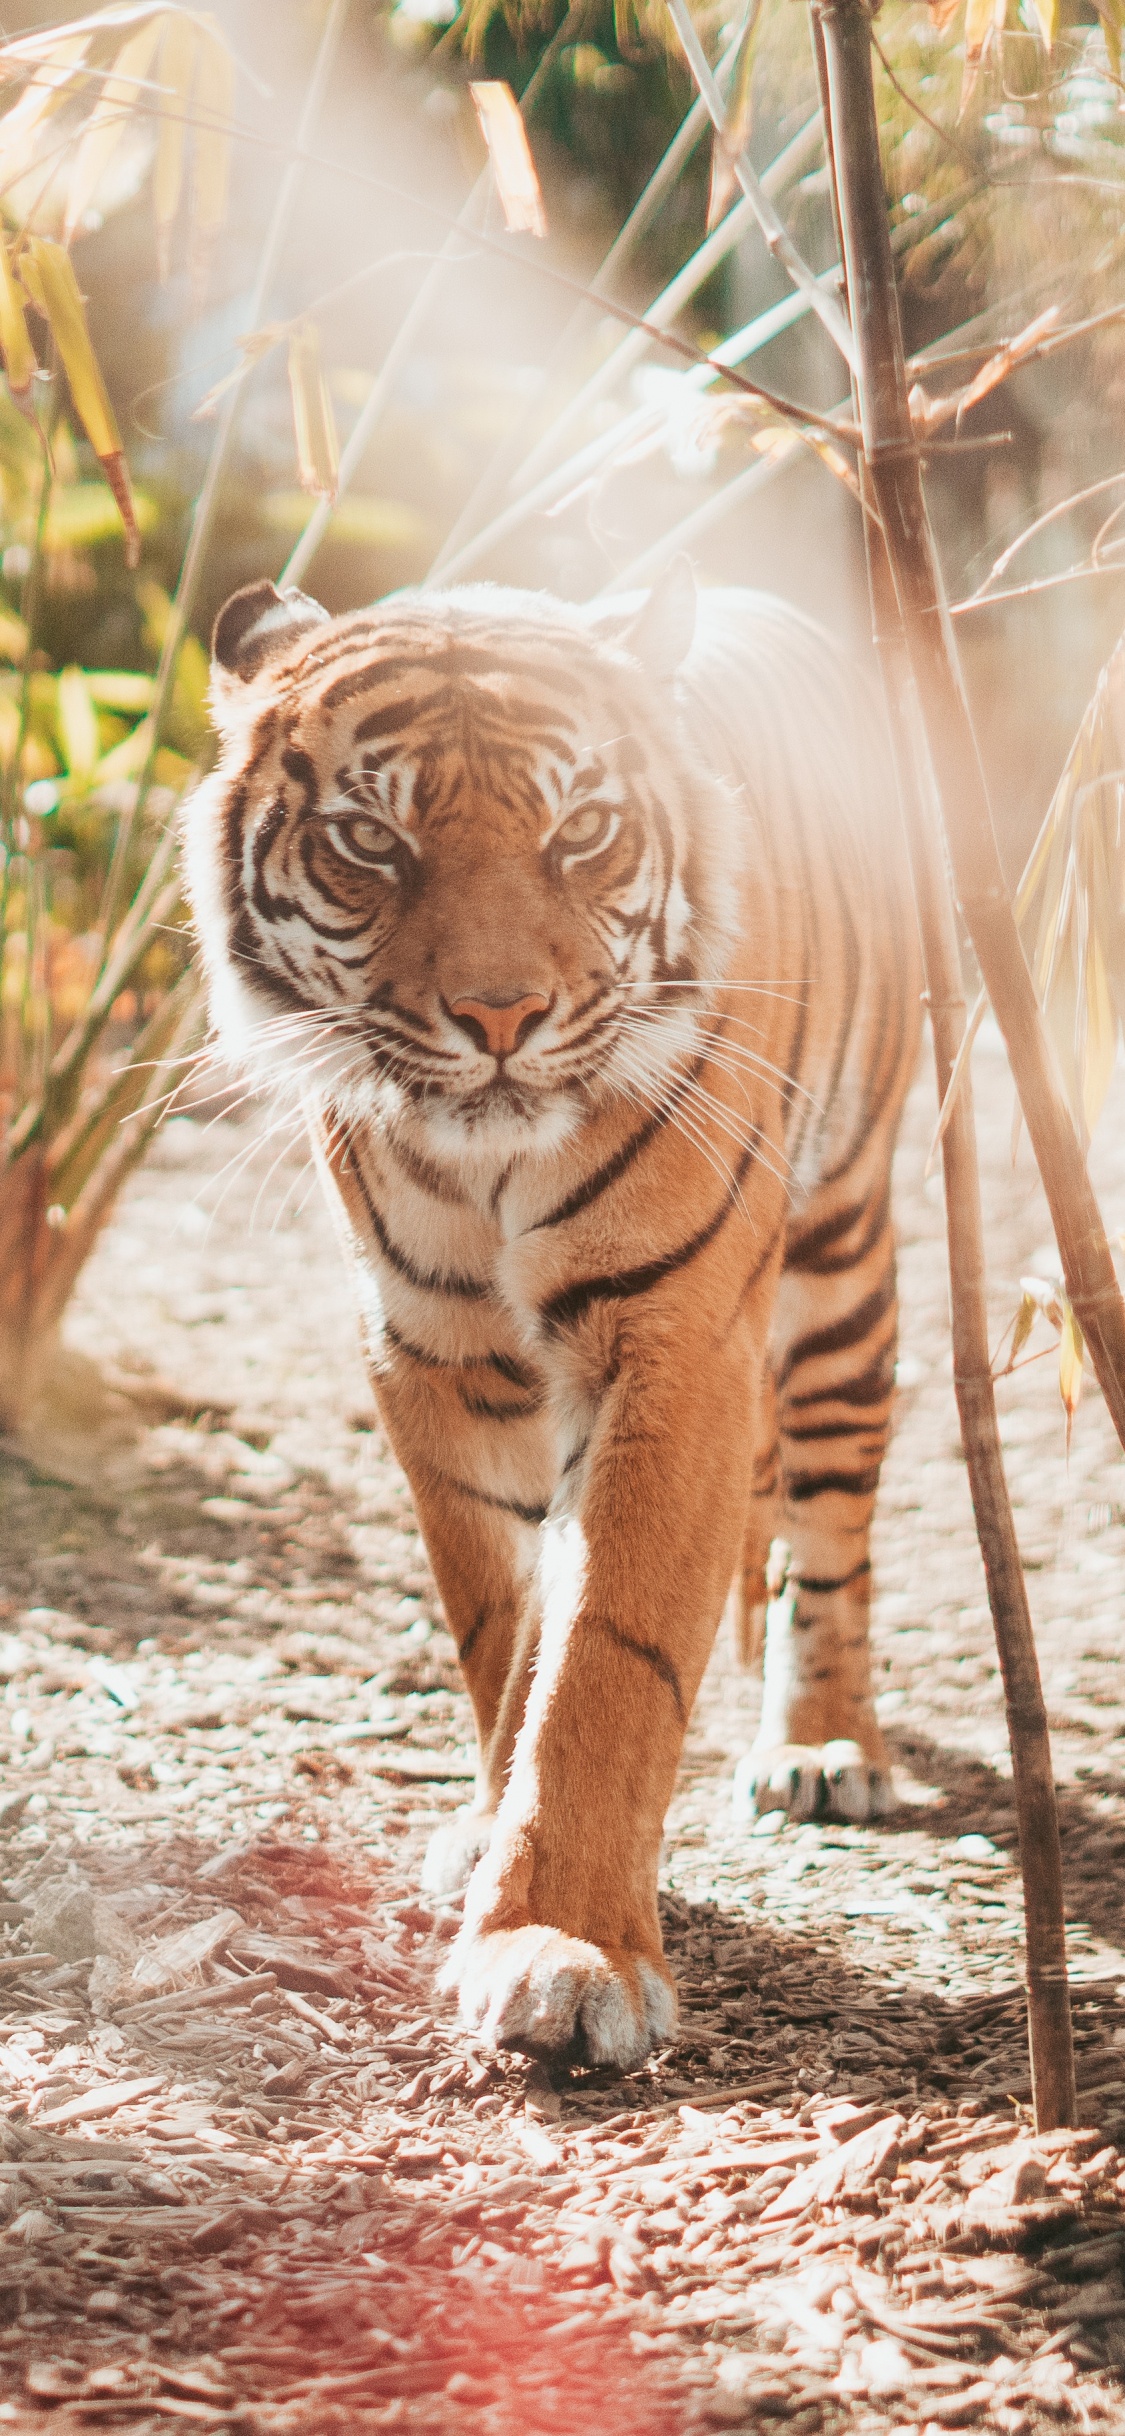 Brown and Black Tiger Lying on Ground During Daytime. Wallpaper in 1125x2436 Resolution